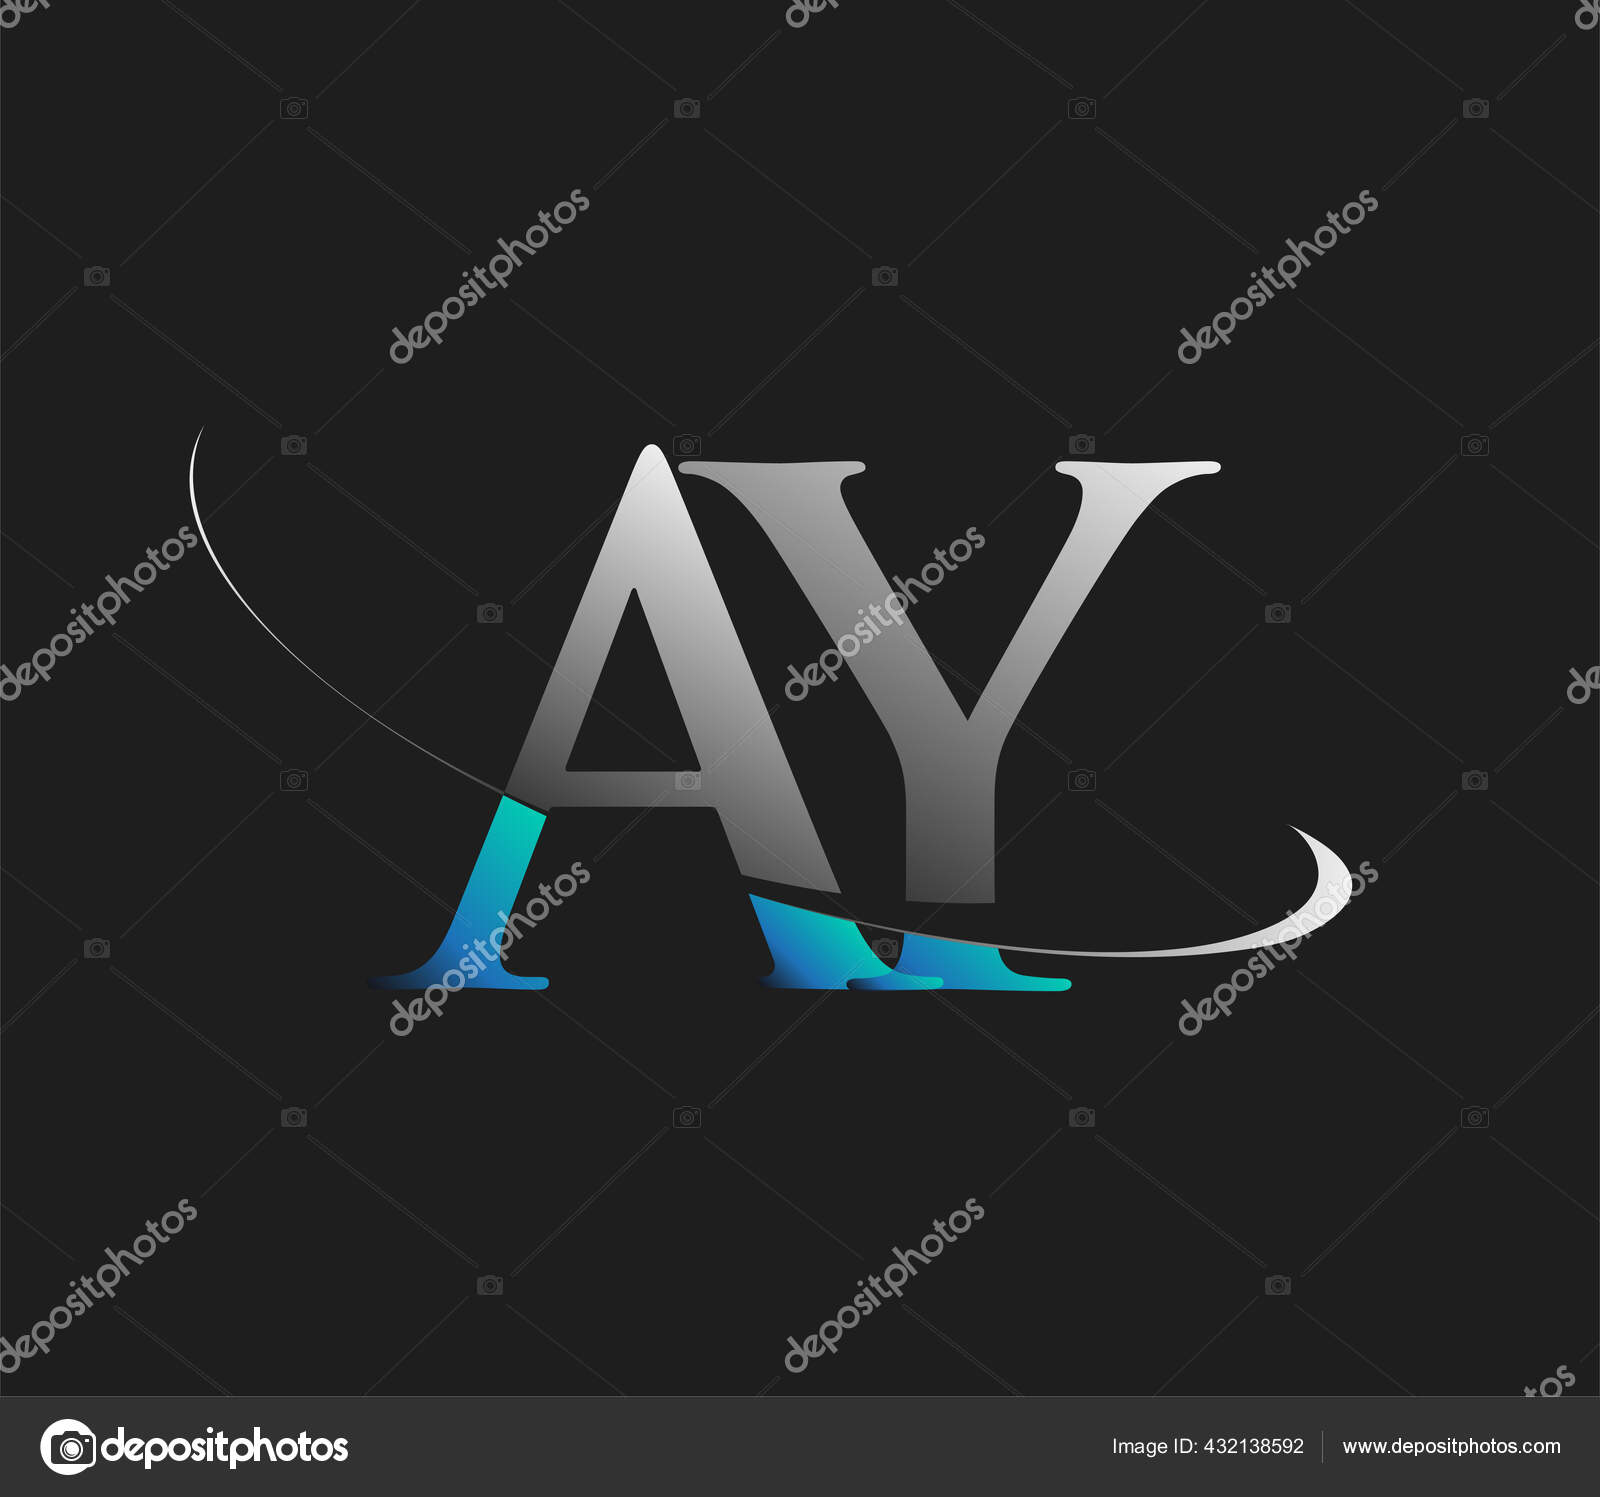 Initial AY Letter Logo Design Vector Template. Creative Luxury Letter AY  Logo Design Stock Vector - Illustration of business, company: 205720428